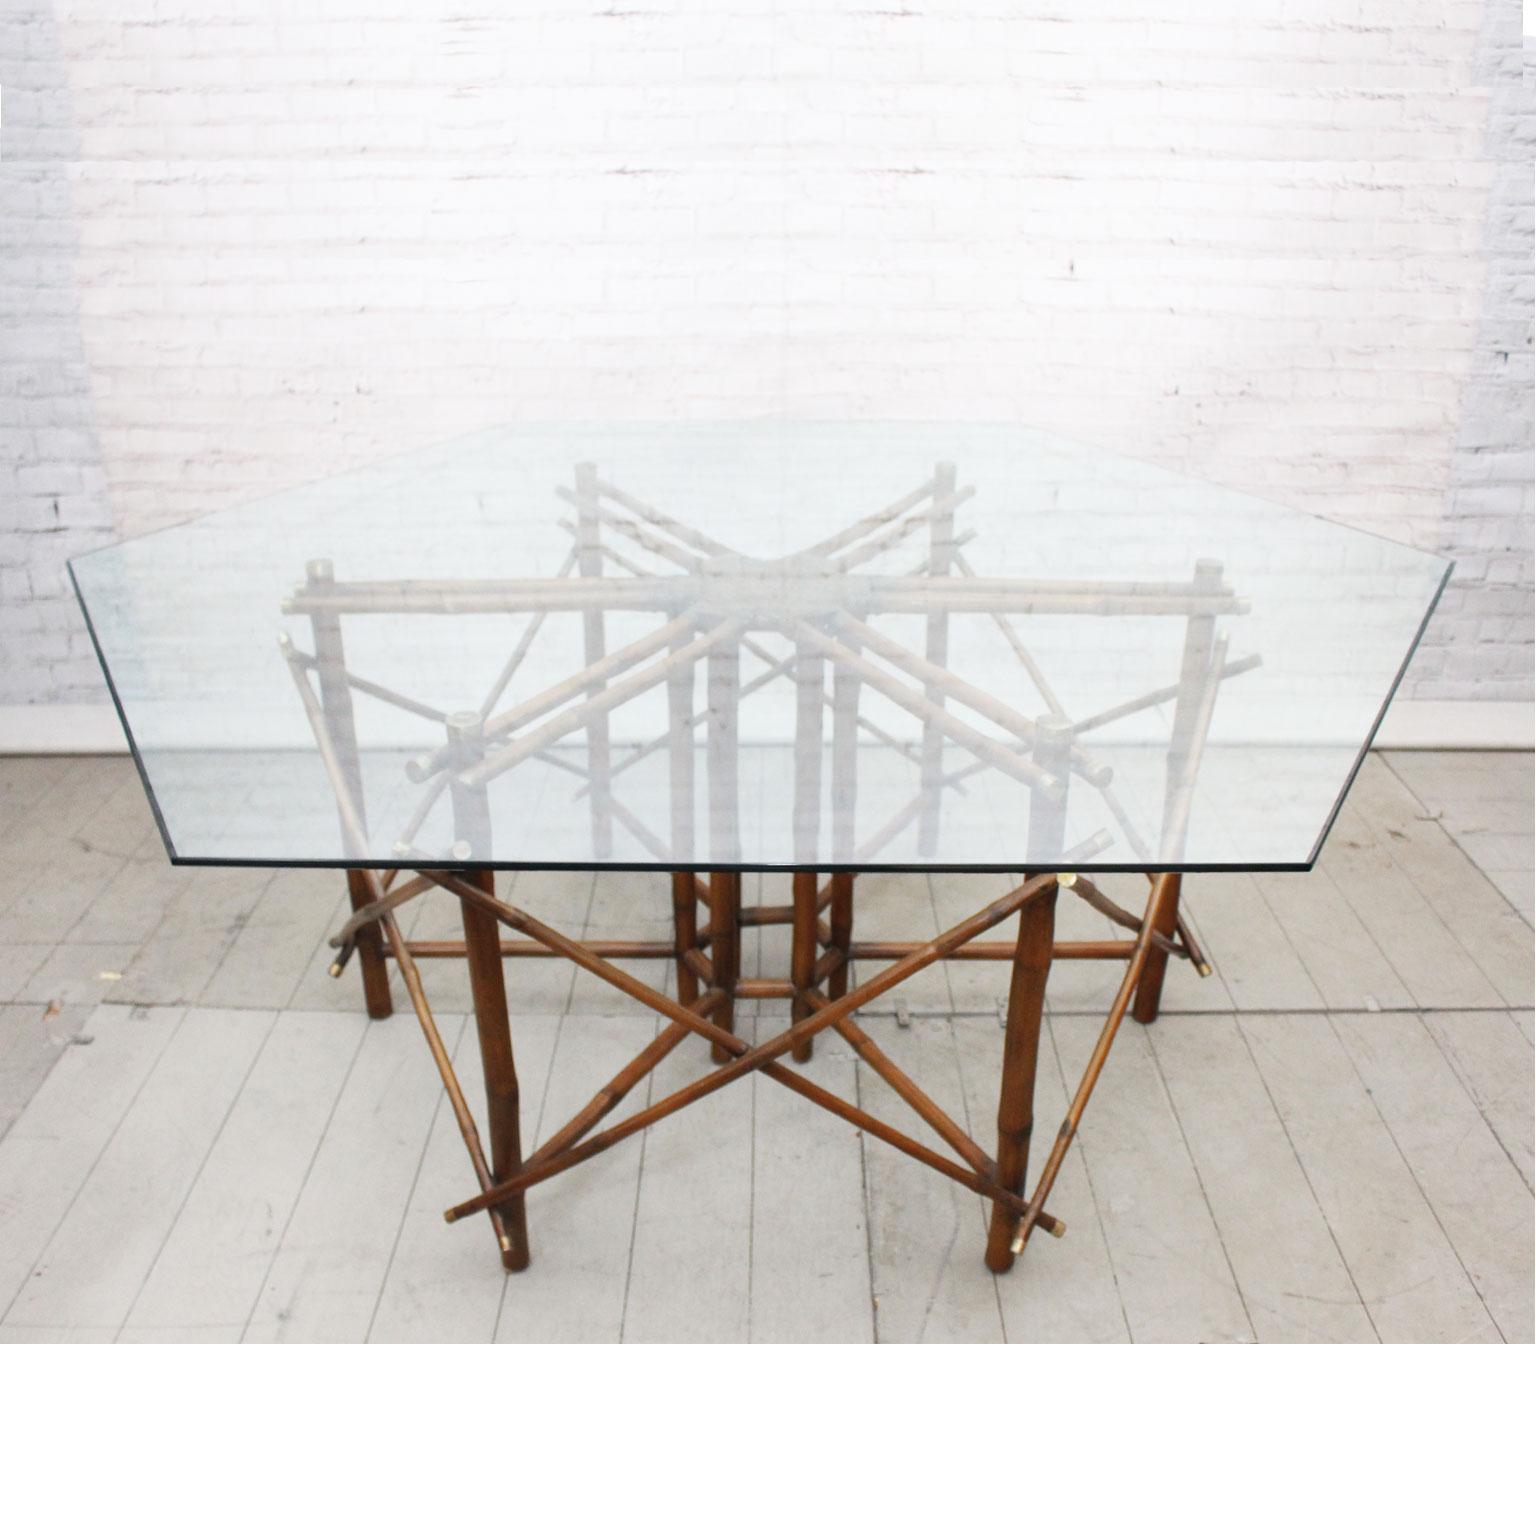 Mid-20th Century Midcentury Ficks Reed Bamboo, Brass and Glass Dining Table by John Wisner For Sale